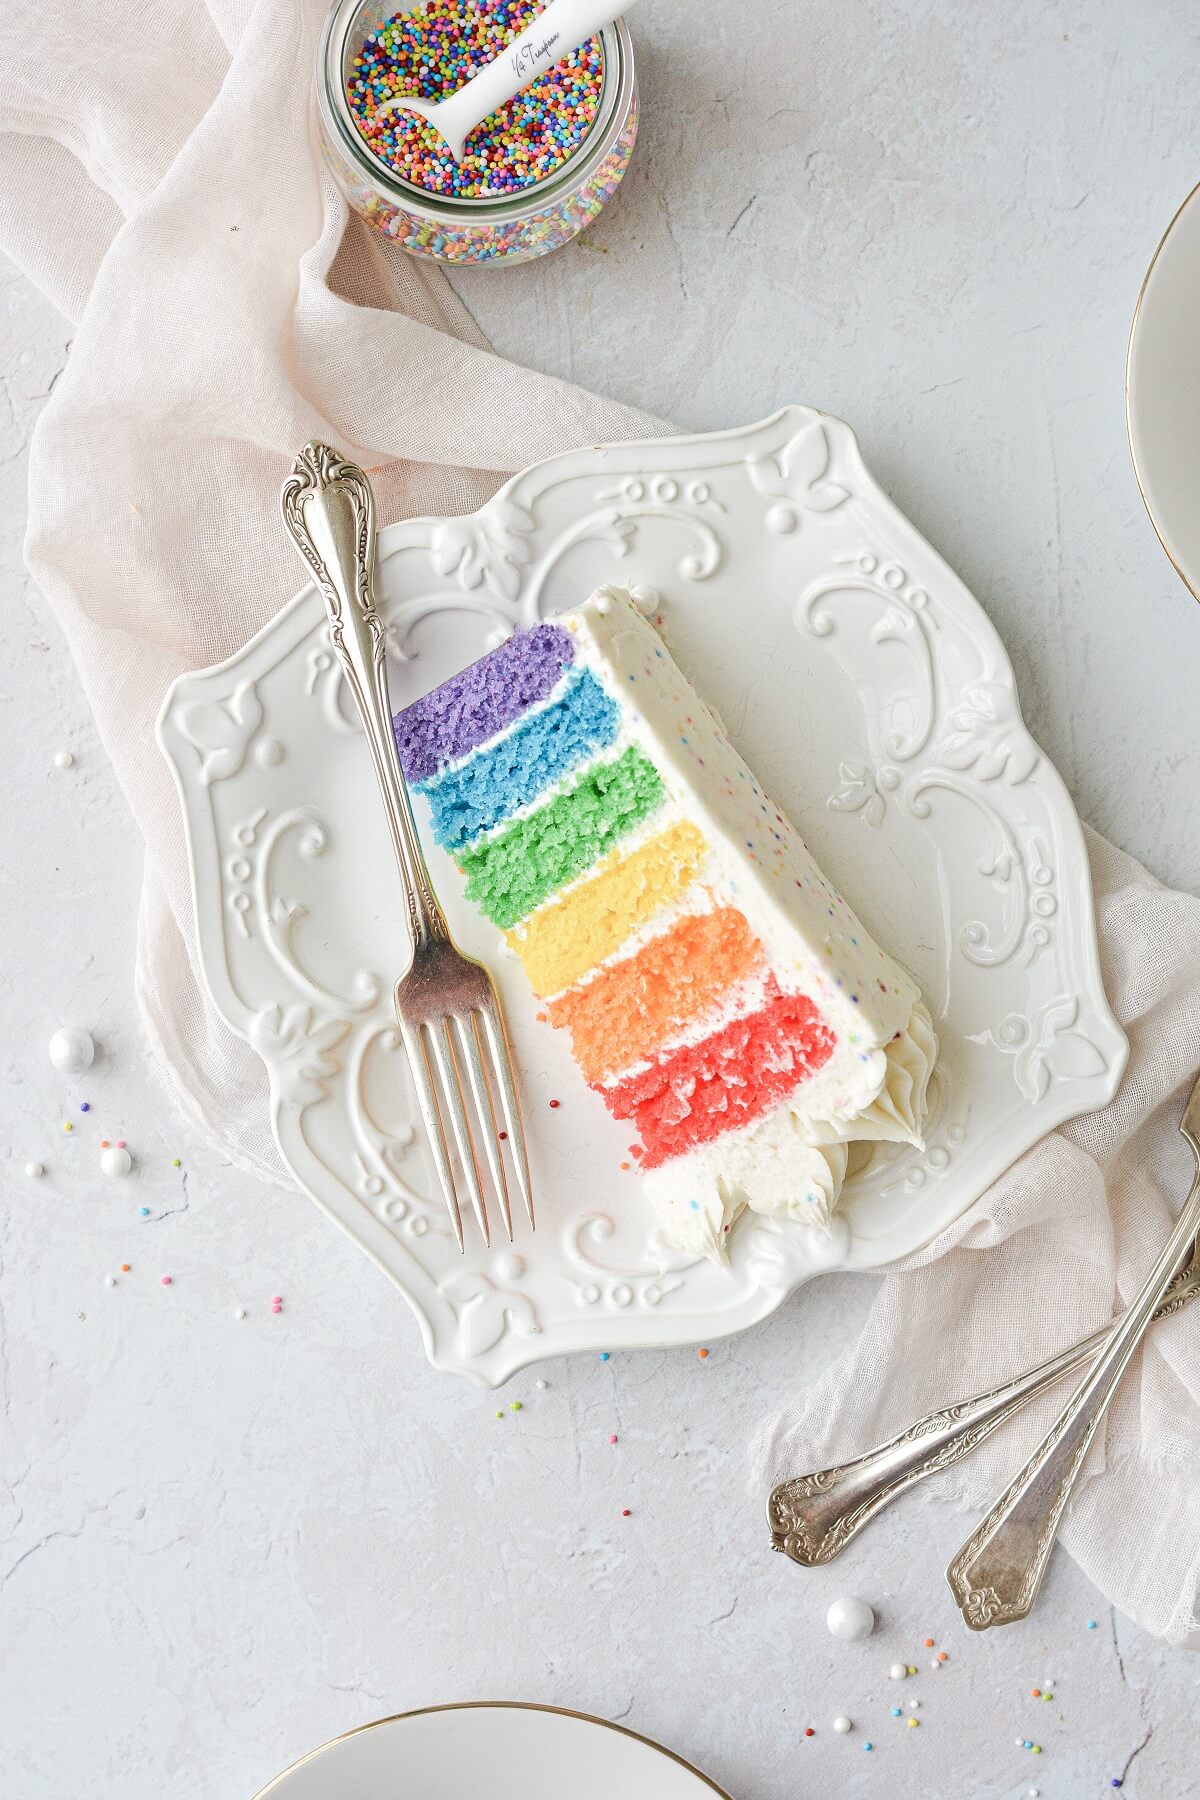 A slice of rainbow cake on a white plate.